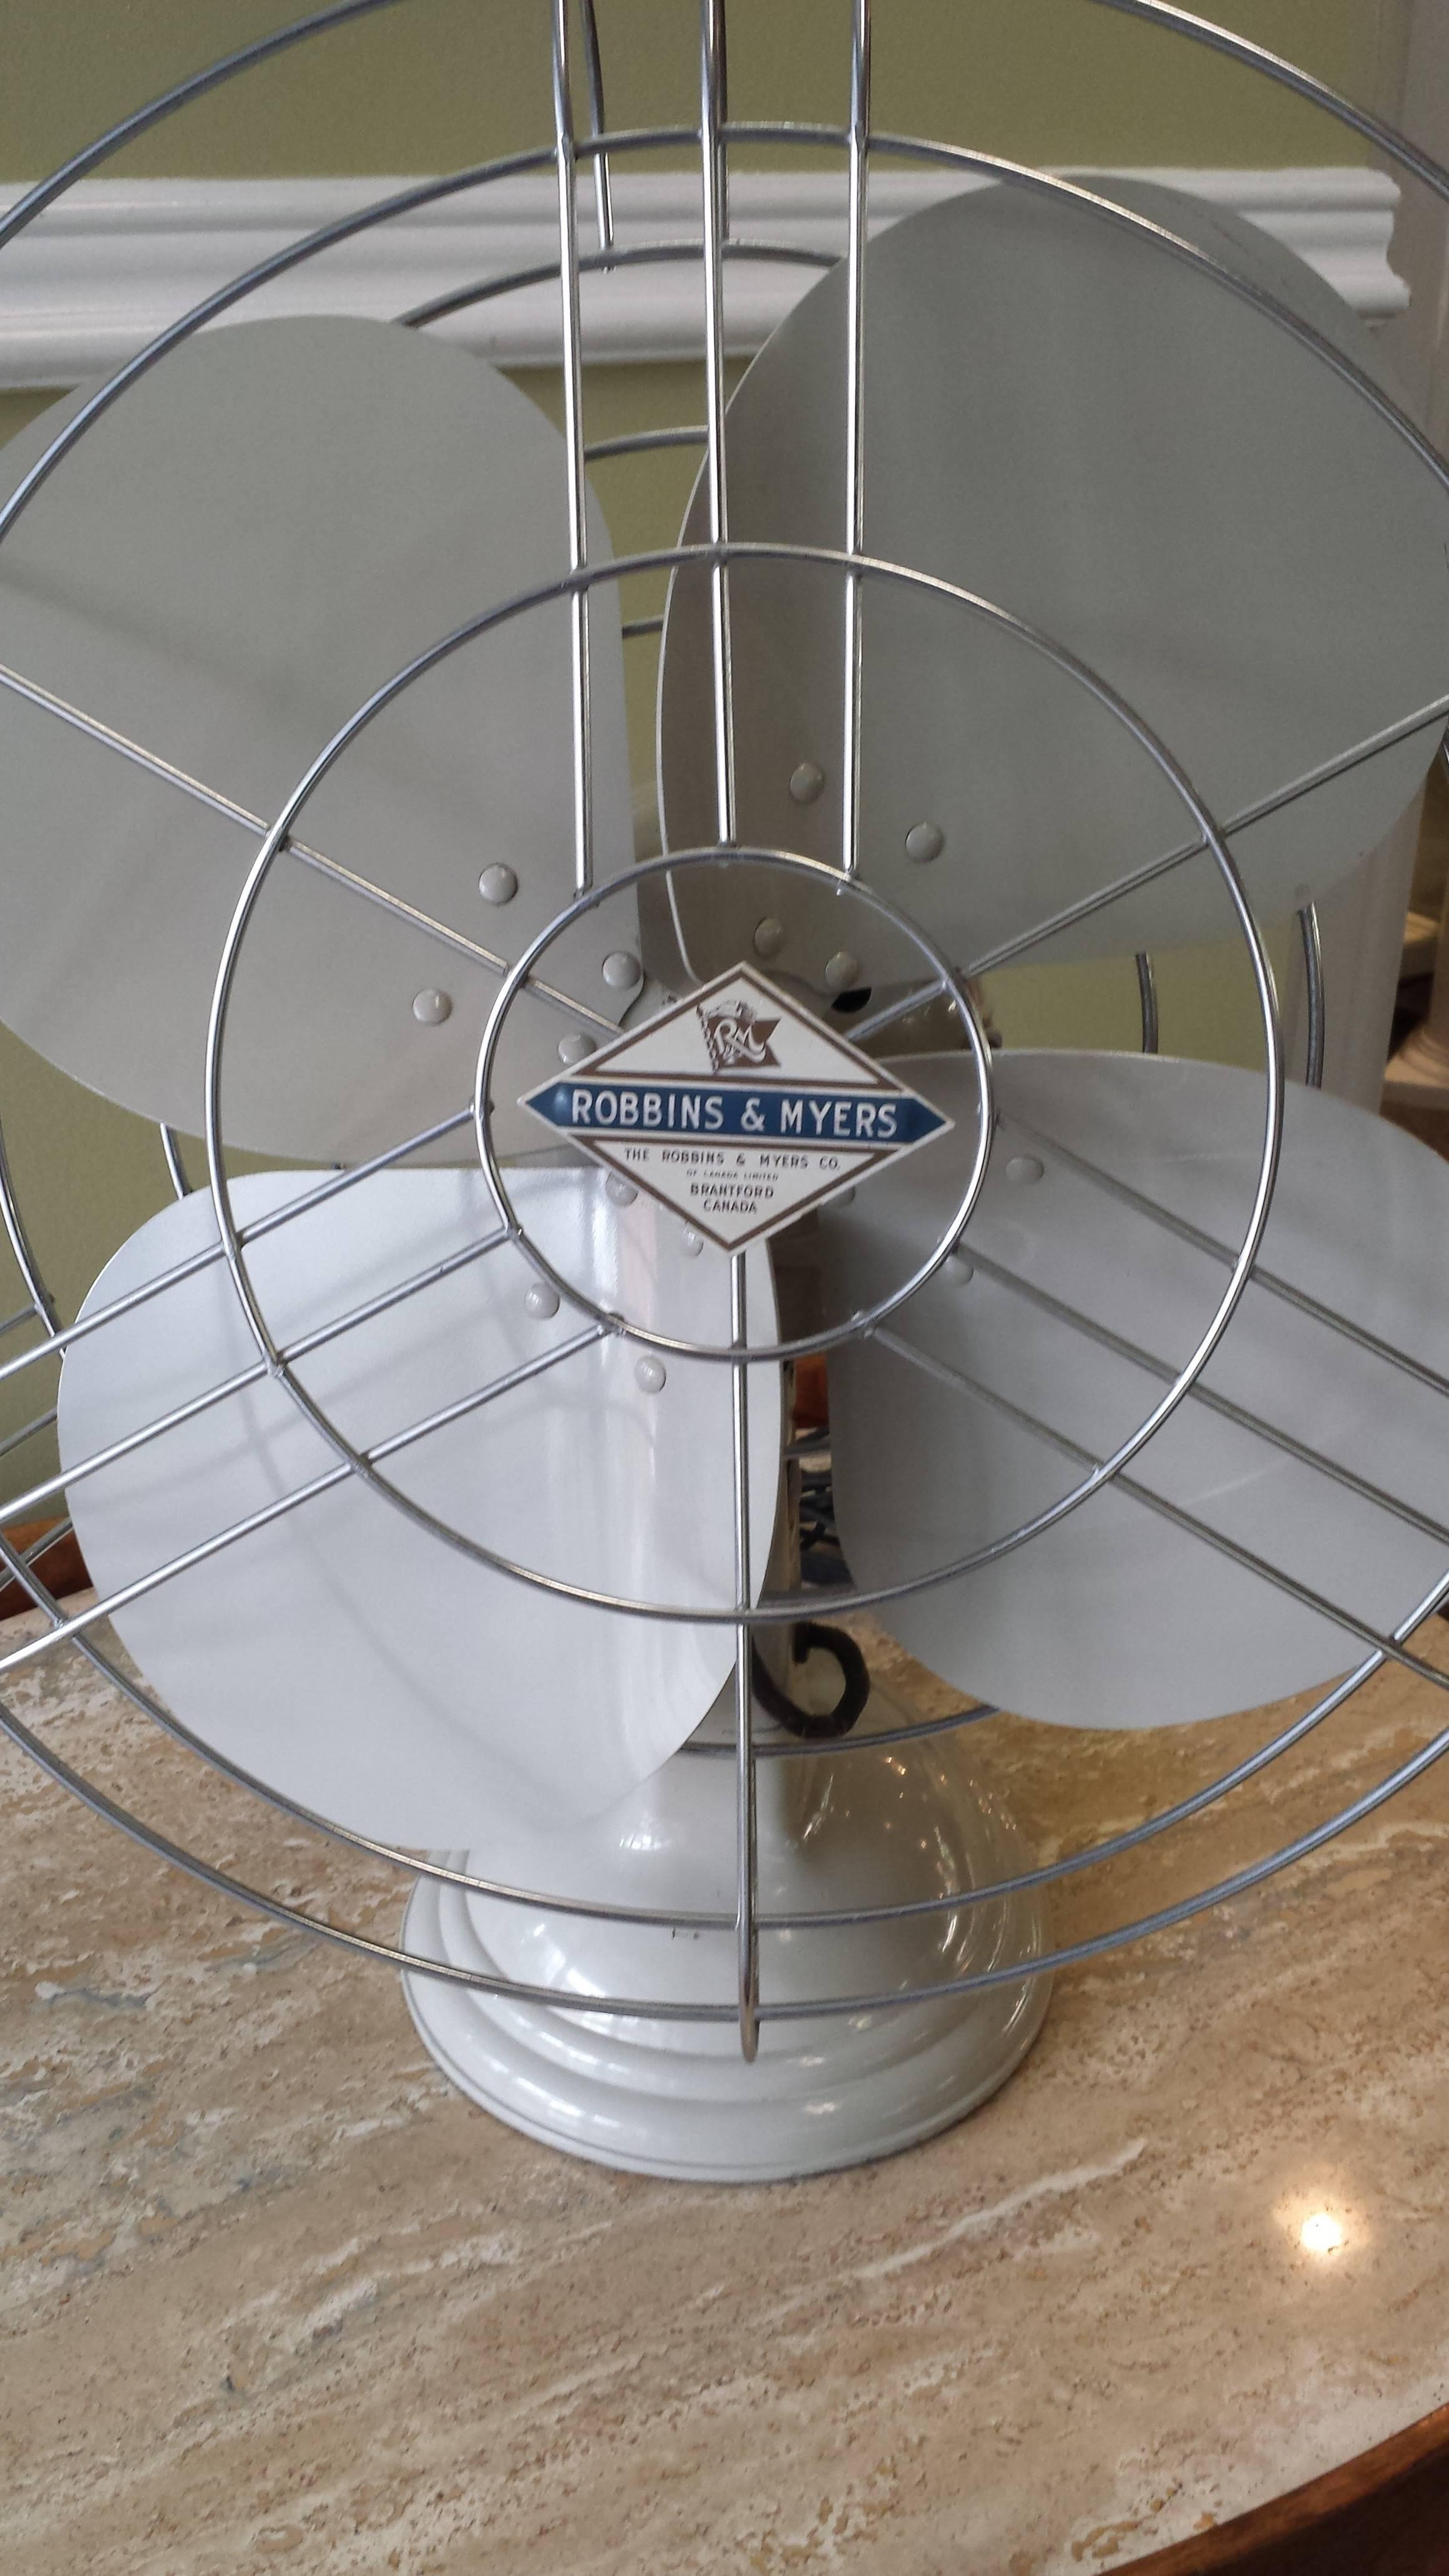 Robbins & Myers Mid-Century electric three-speed industrial table fan 1950s, in a beige color paint, very little wear on the paint, the fan is near mint, chromed safety cage is straight and the chrome is perfect. Made in Brantford, Ontario,